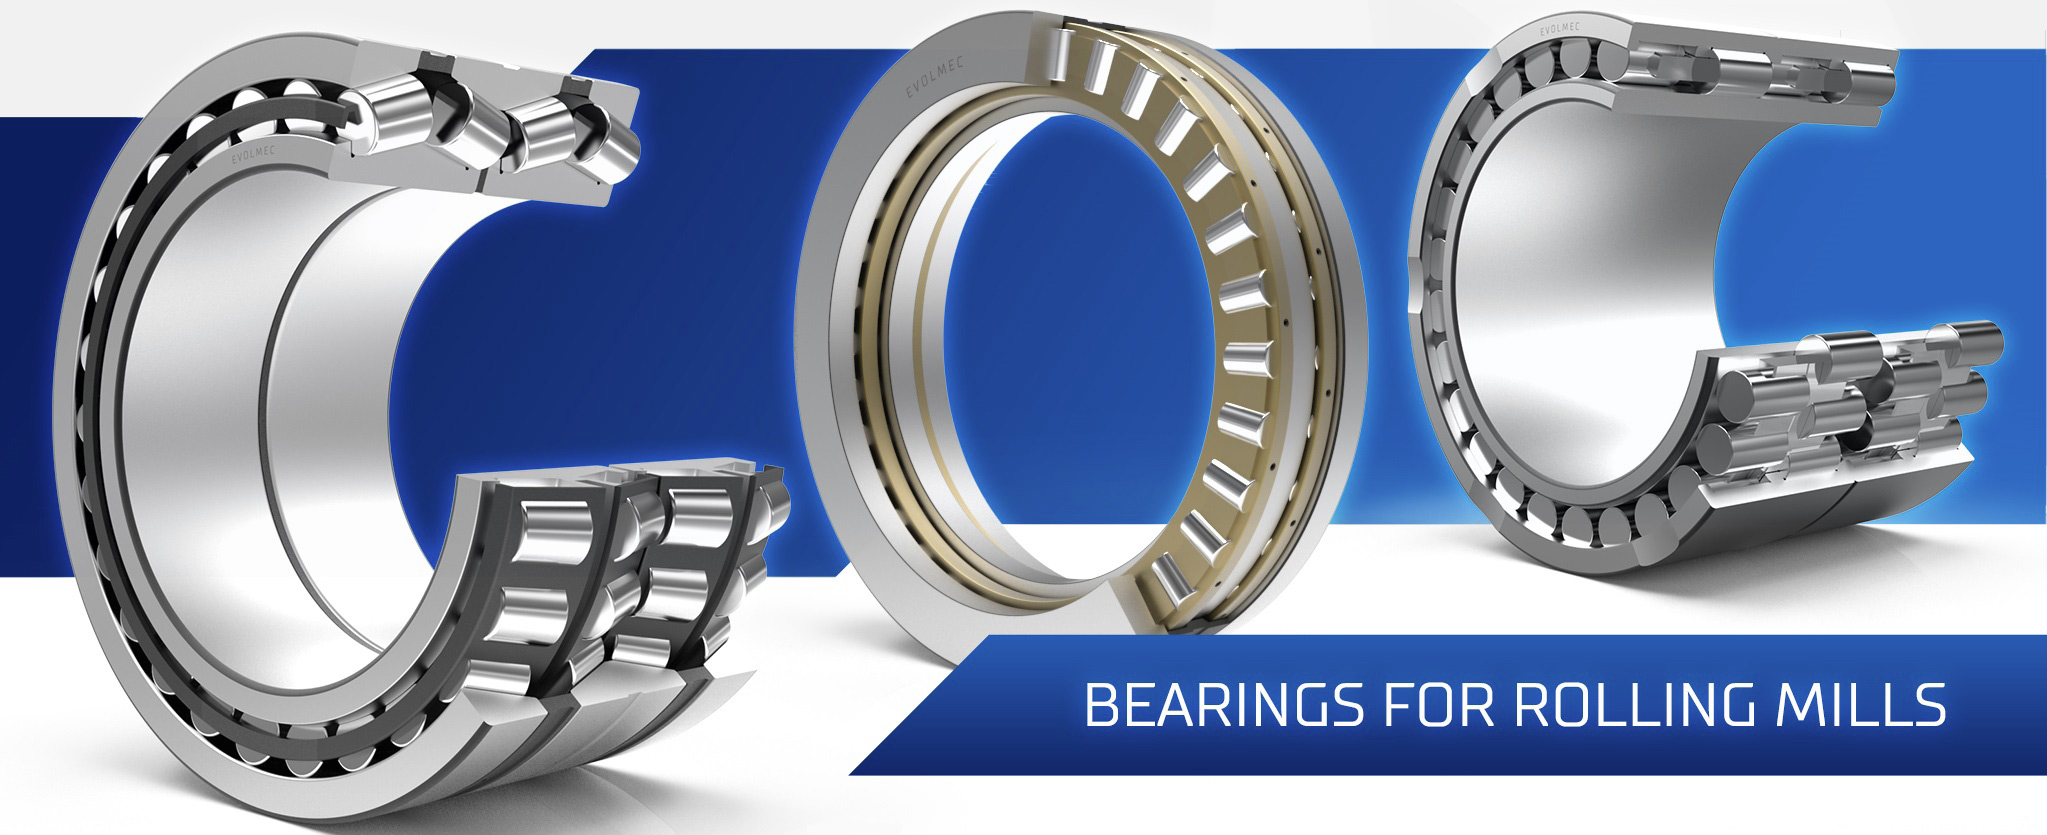 Bearing for rolling mills